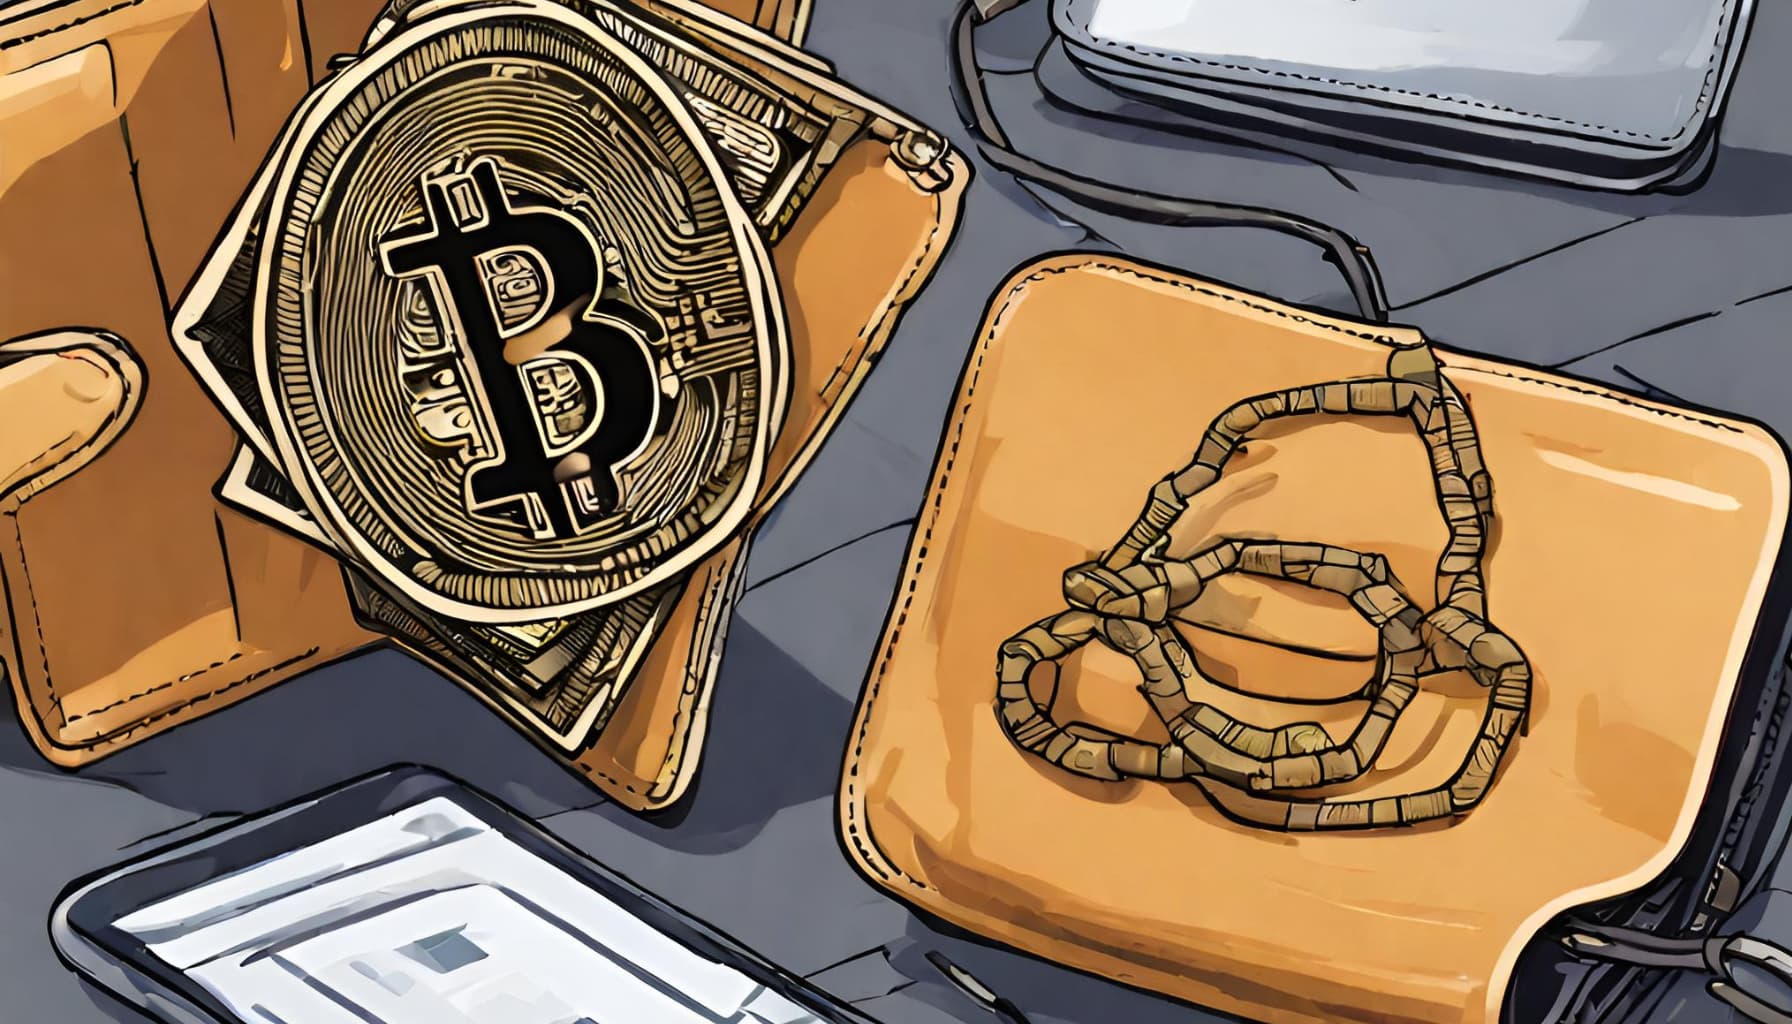 Bucket Technologies image showing animated hand holding wallet with crypto symbol on it